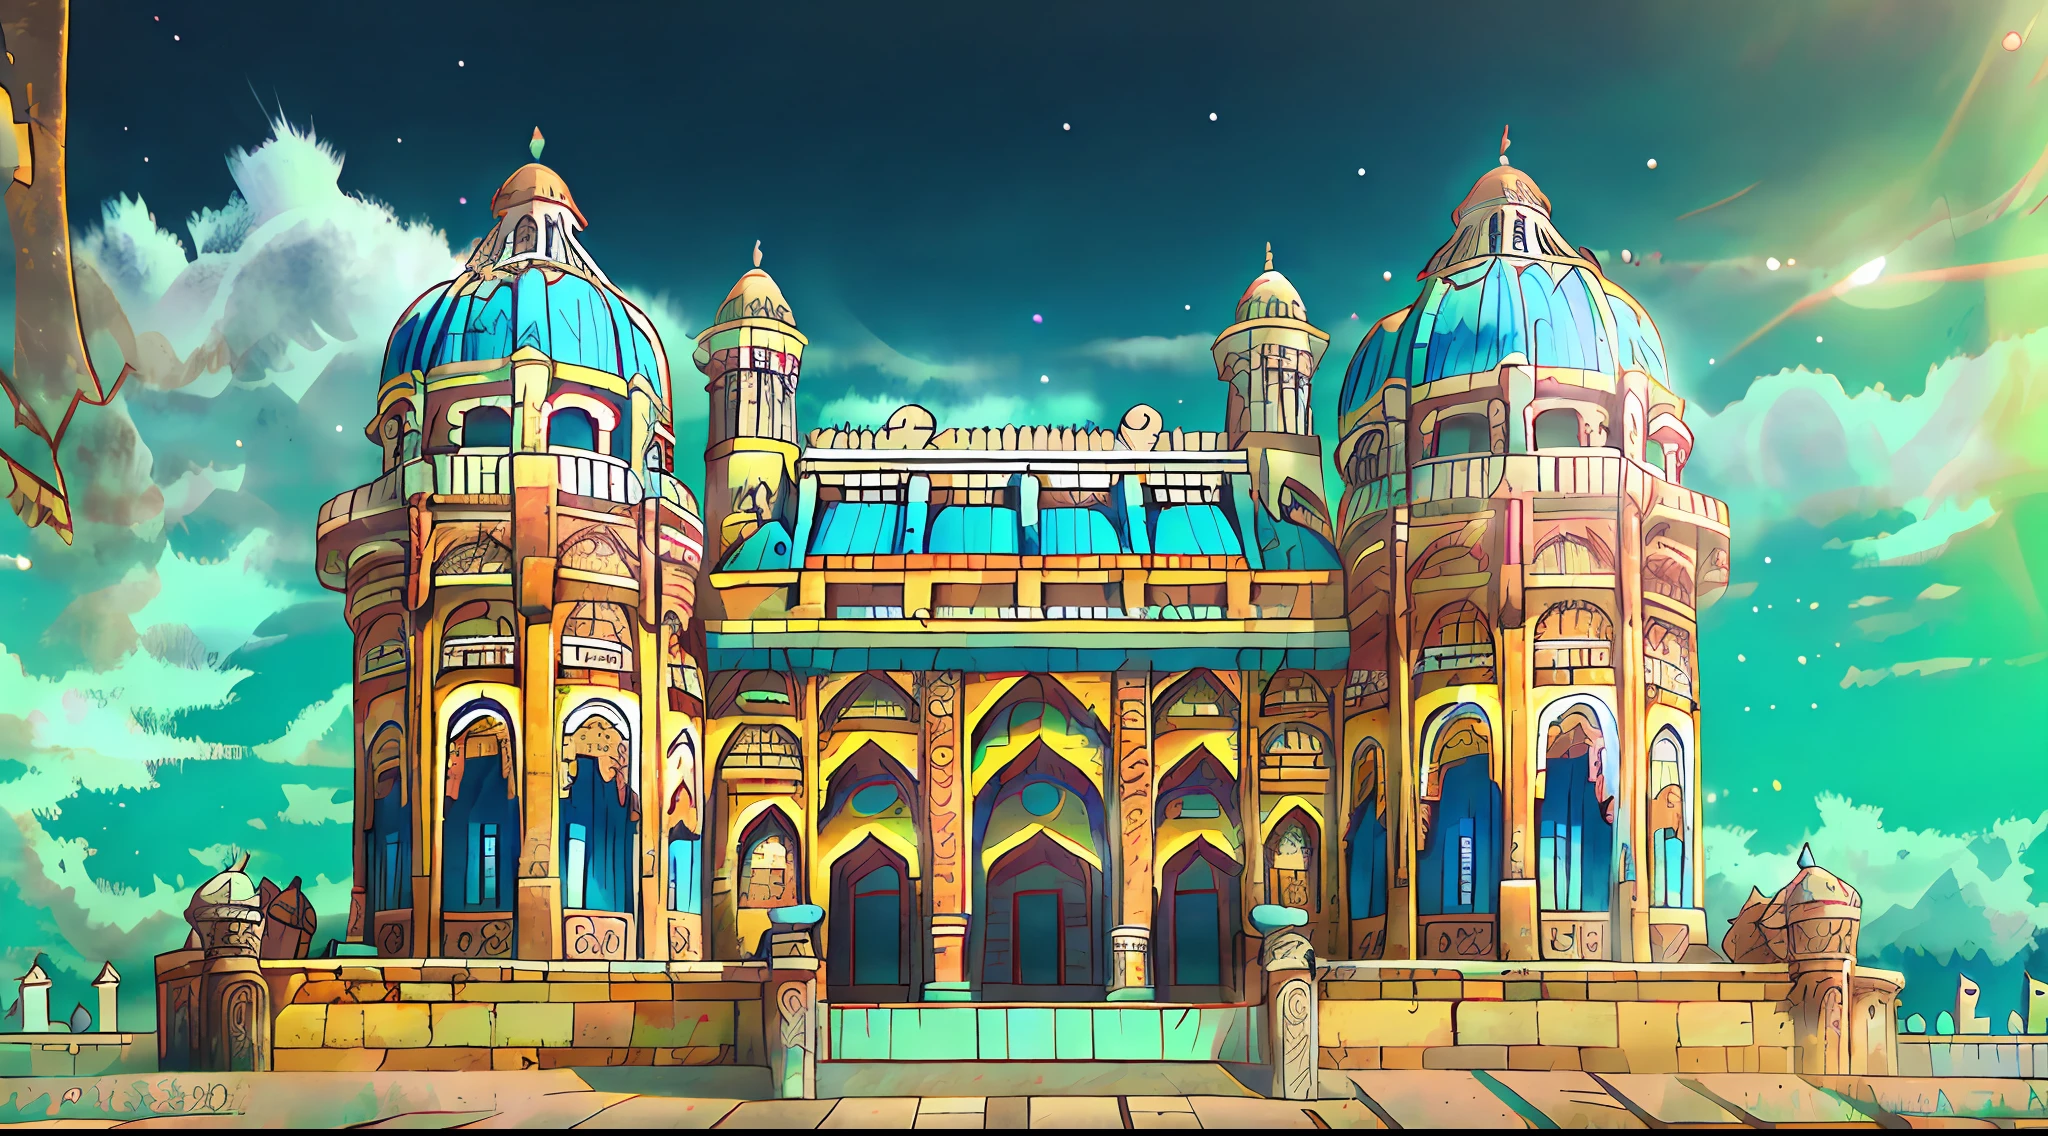 create an ancient Indian palace realistic and high quality image, in blue and yellow tones, with sun and blue sky and some white clouds.